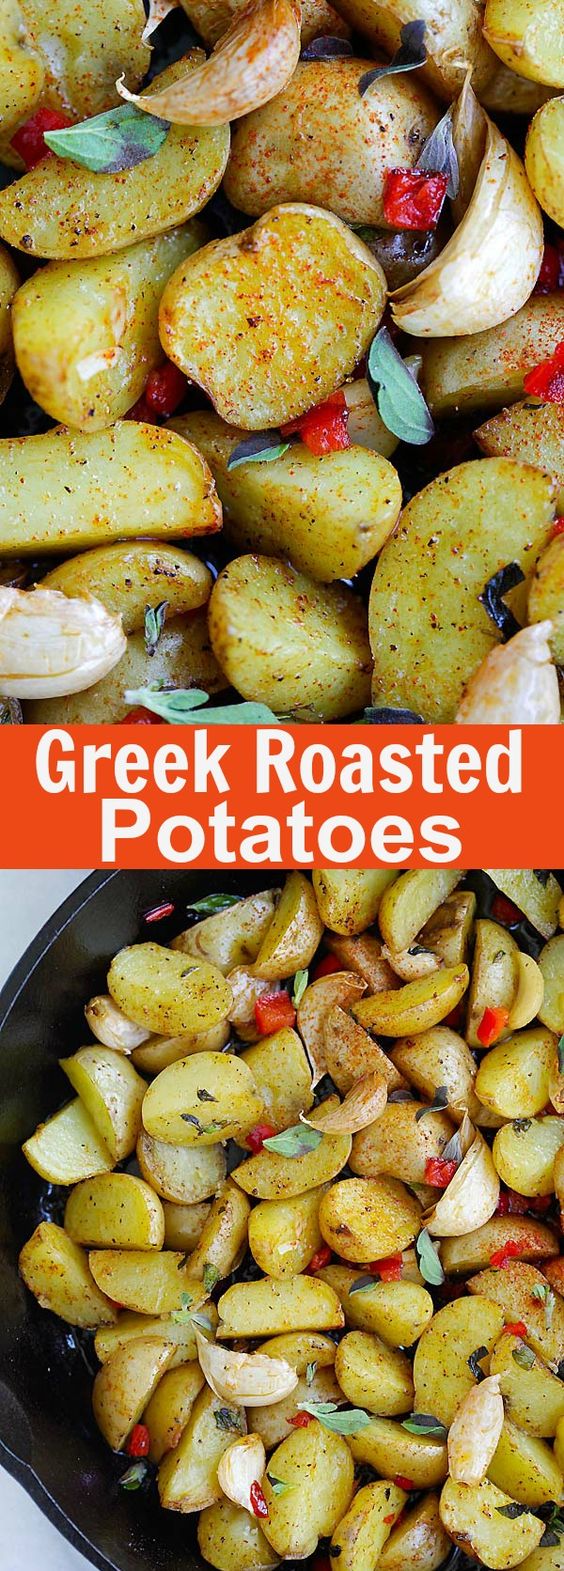 Greek Roasted Potatoes - easy and delicious roasted potatoes with garlic, oregano, olive oil and red bell peppers. Takes only 20 mins | rasamalaysia.com